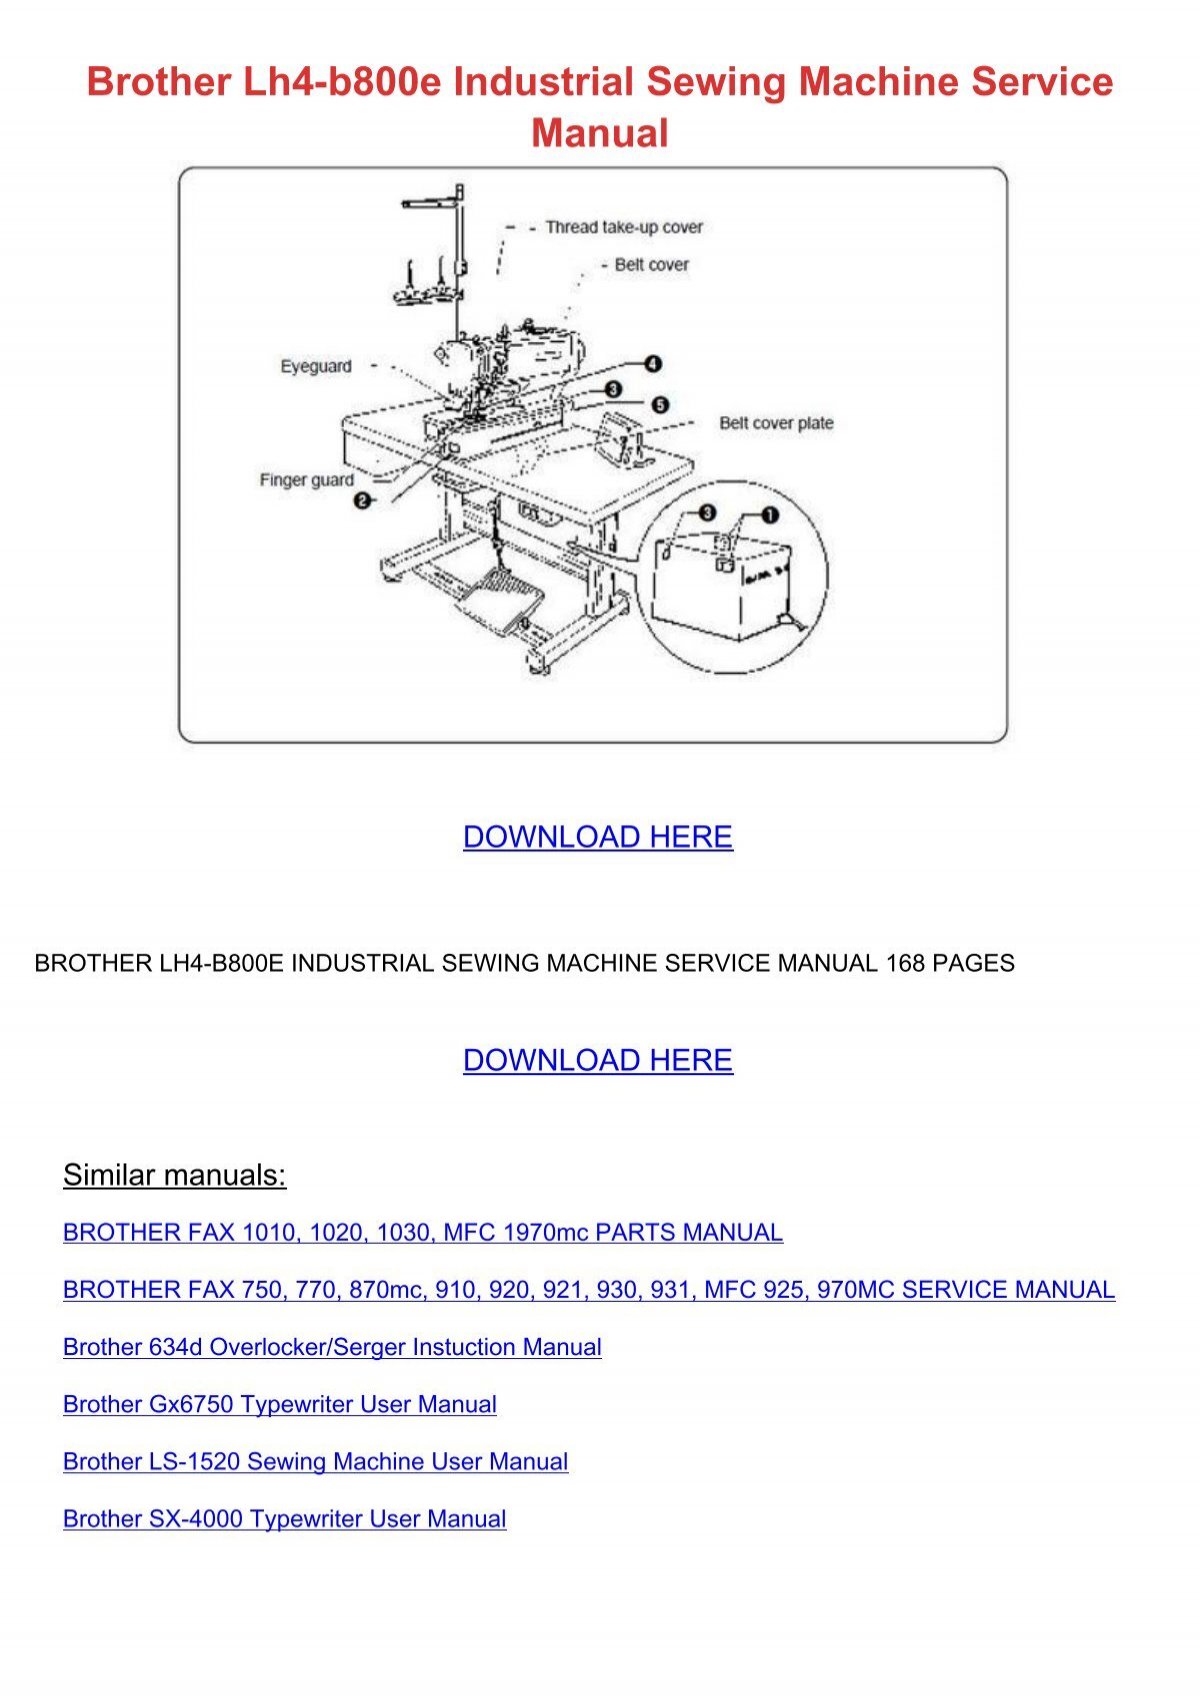 Brother XR-7700 Instruction Manual : Sewing Parts Online